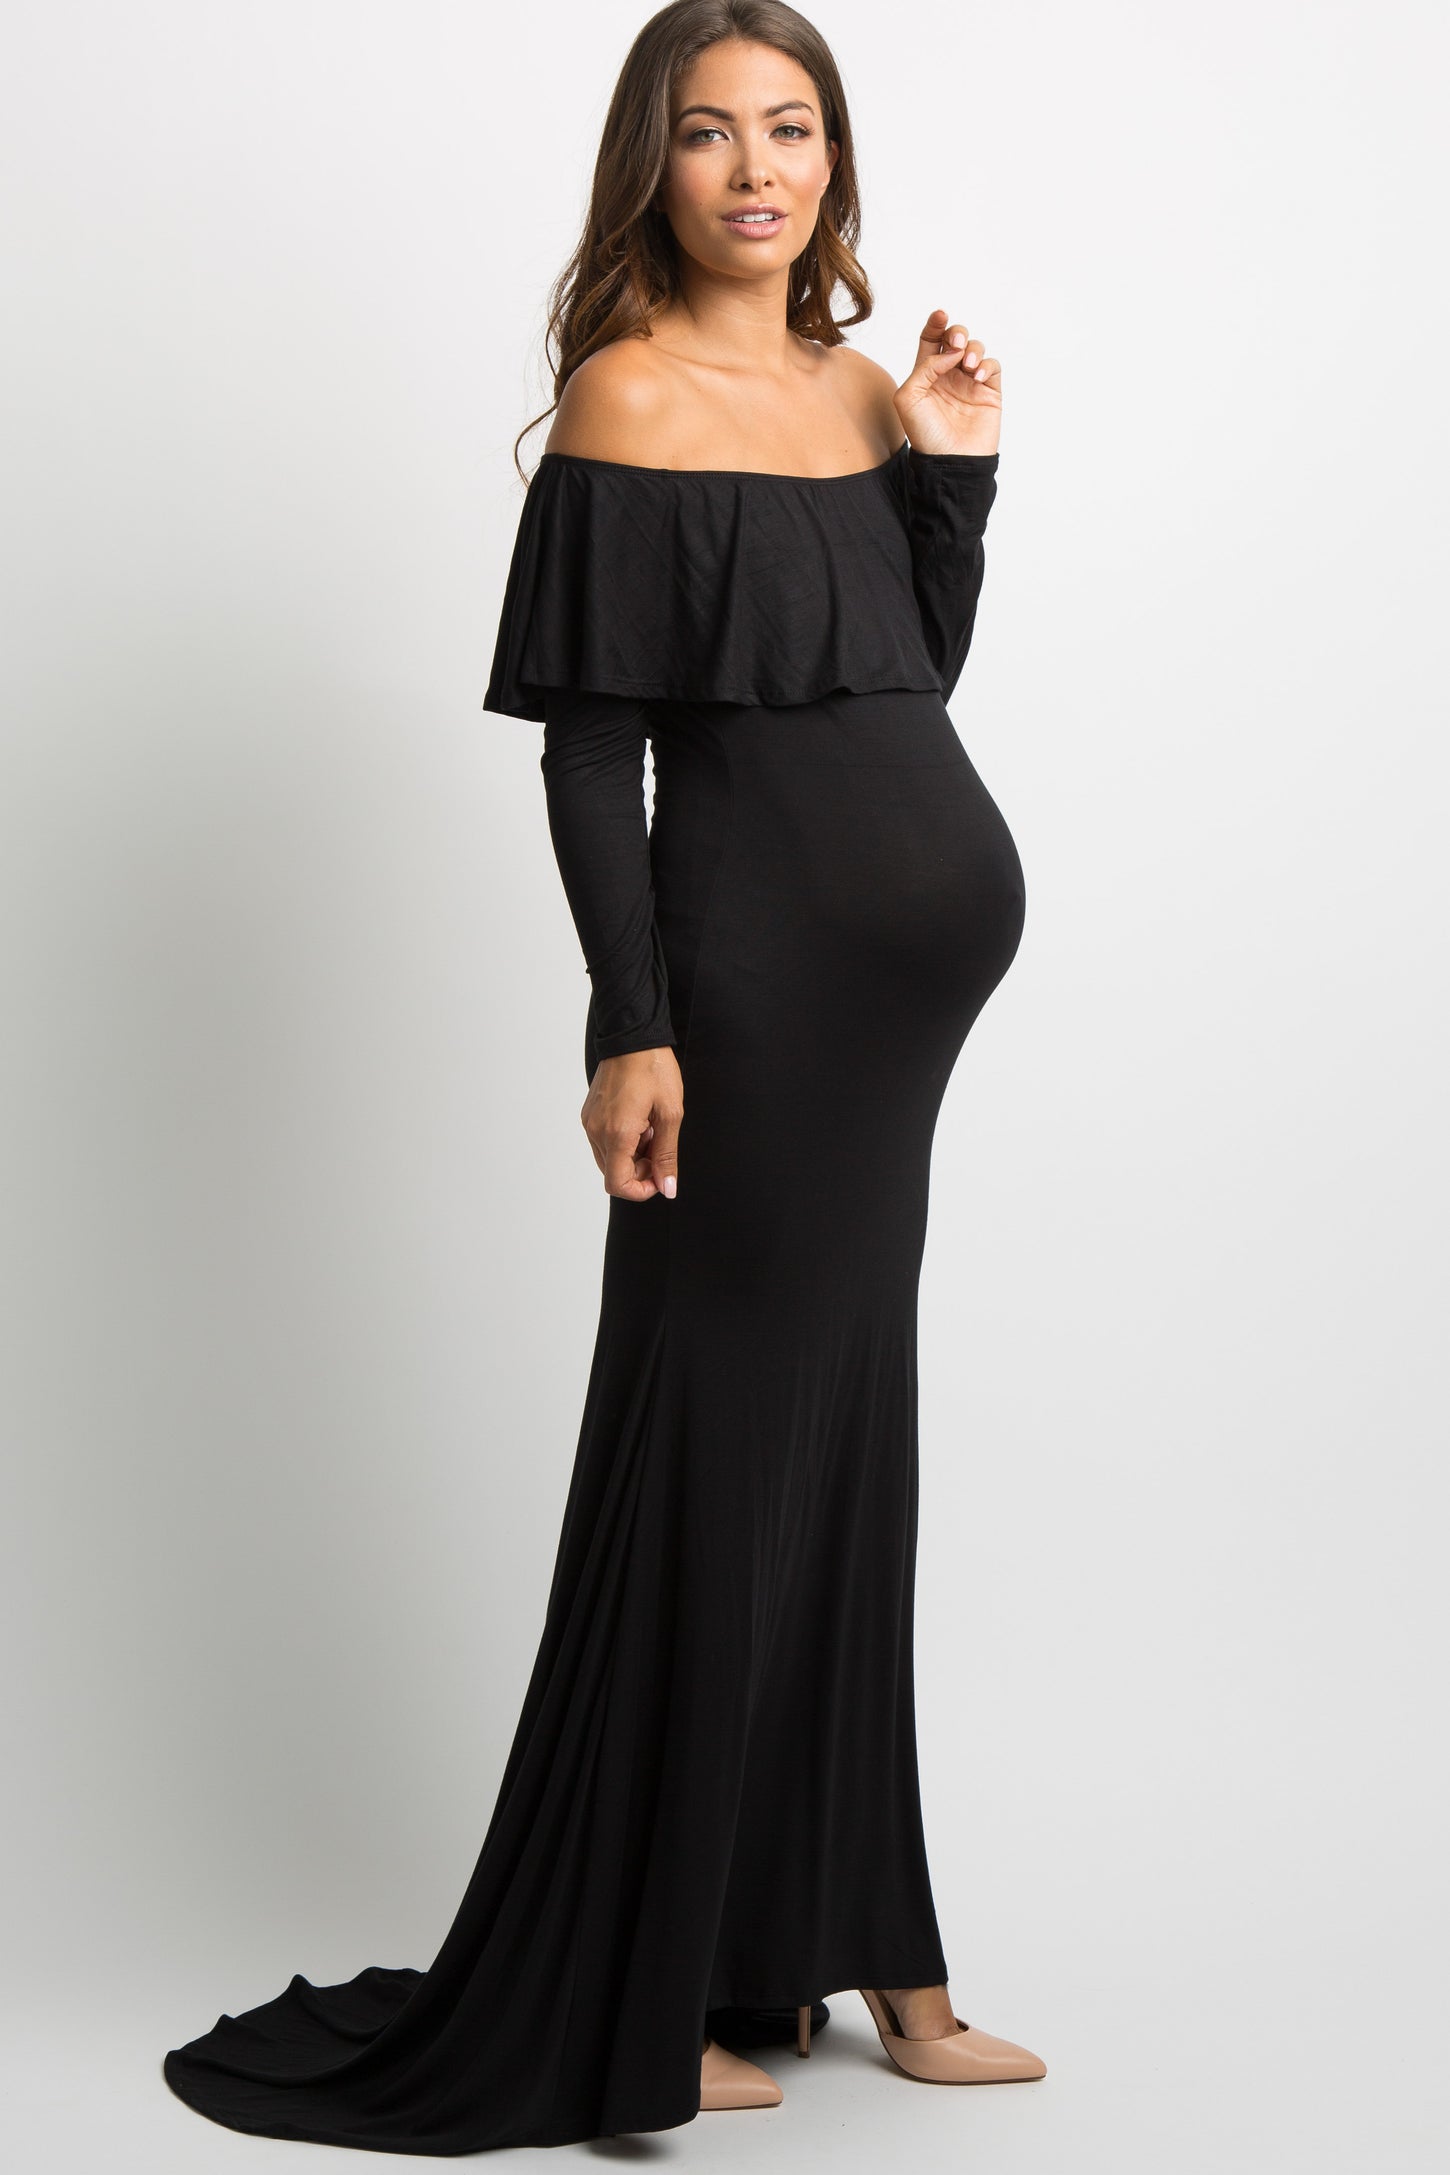 Black Off Shoulder Ruffle Maternity Photoshoot Gown/Dress